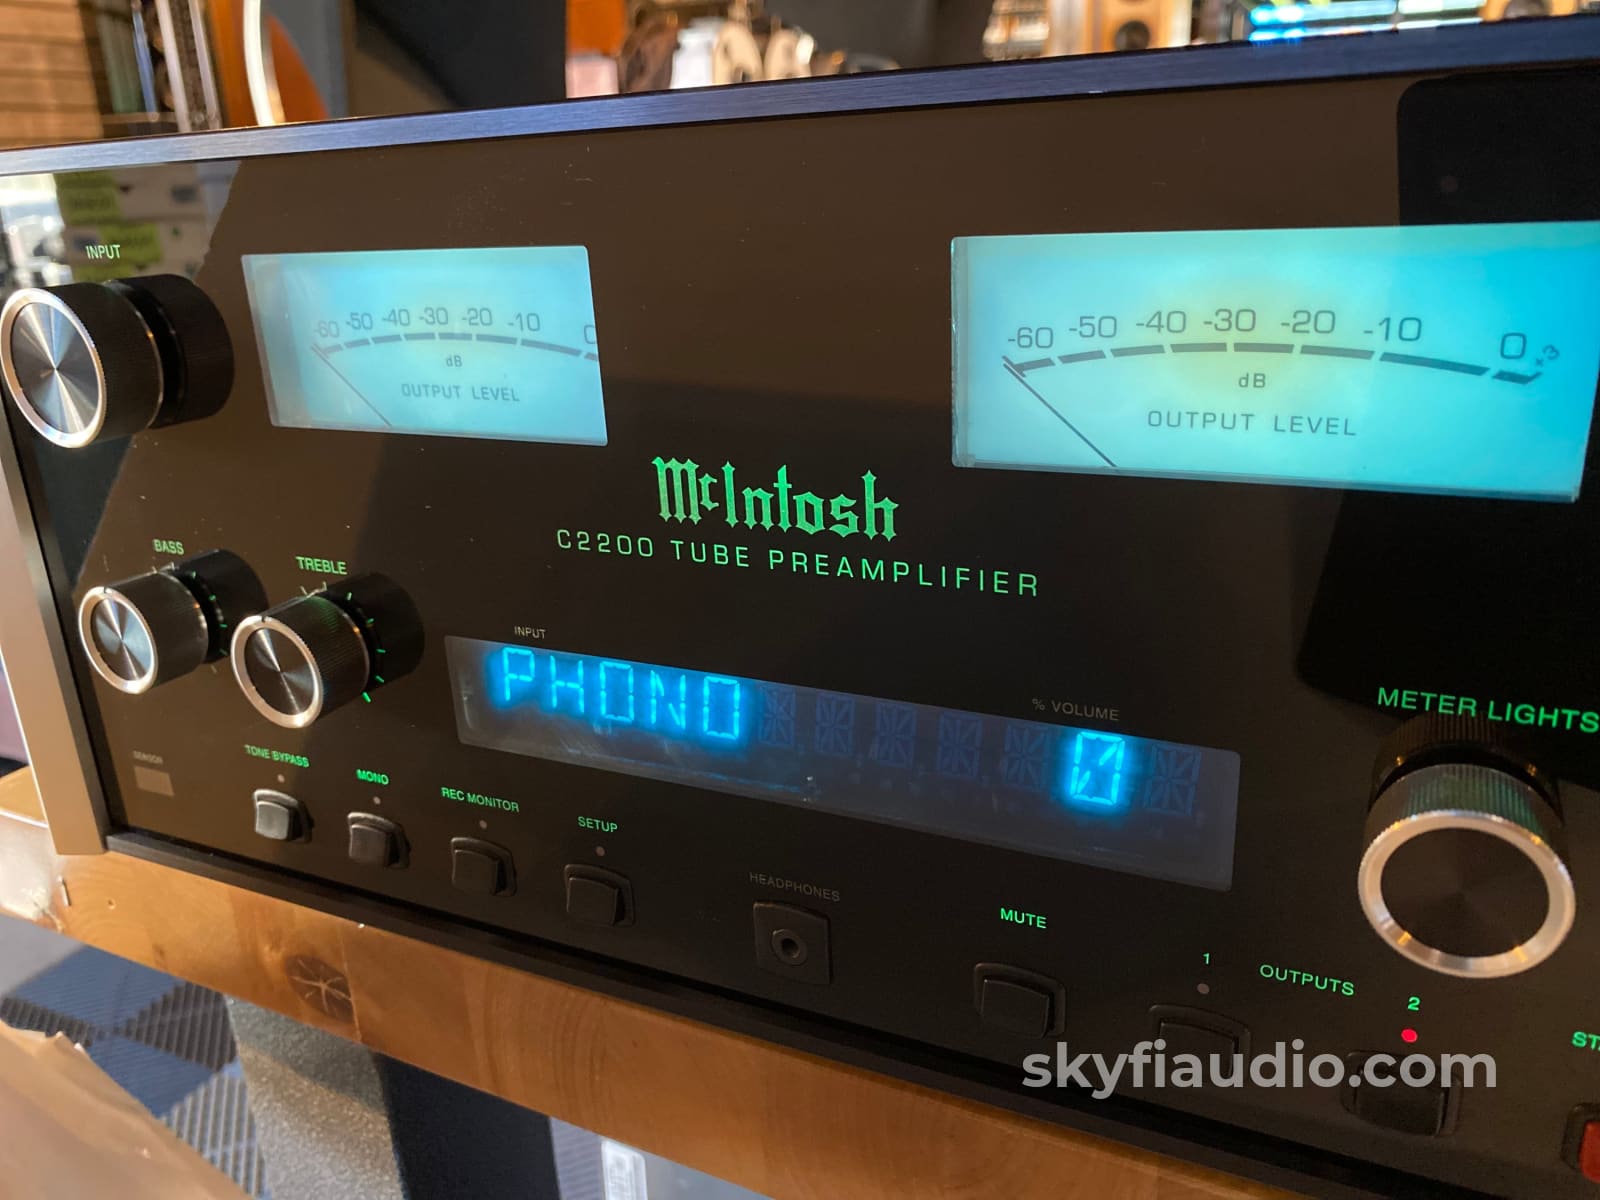 Mcintosh C2200 Tube Preamplifier - All Analog For Purists